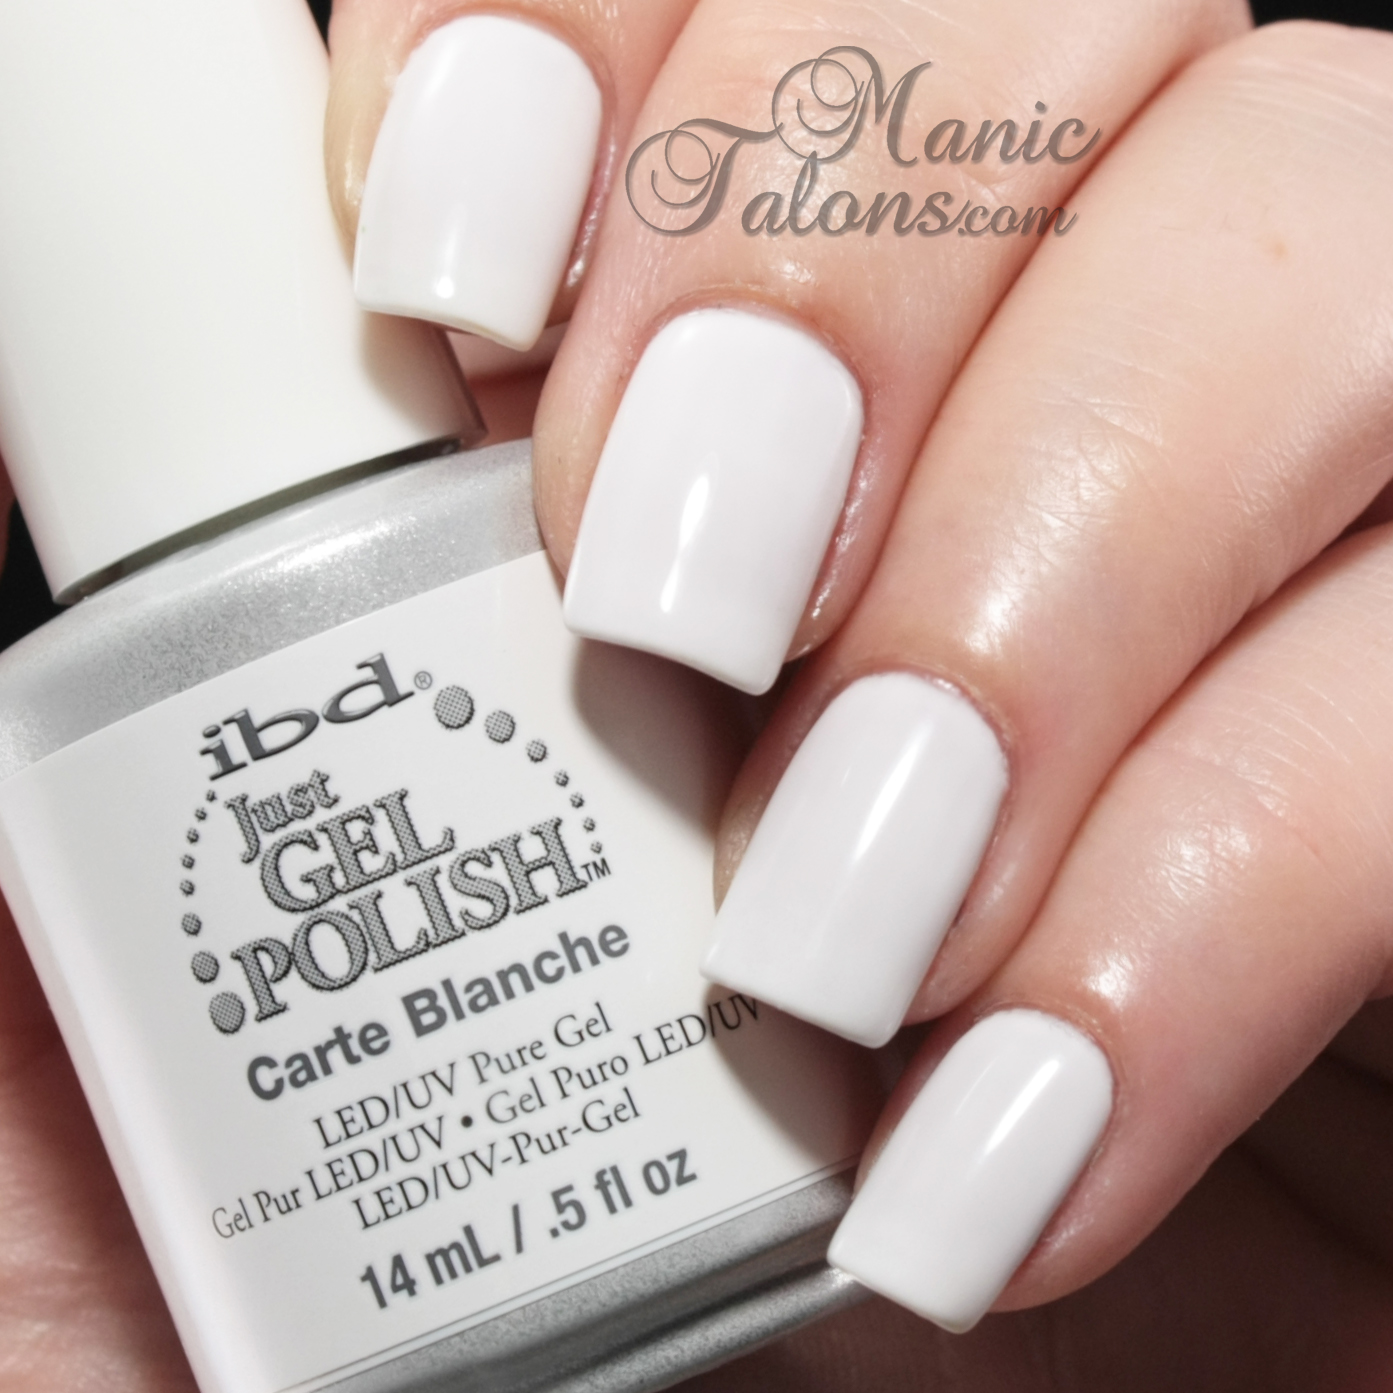 Manic Talons Nail IBD Just Polish Haute Frost Swatches (pic heavy)